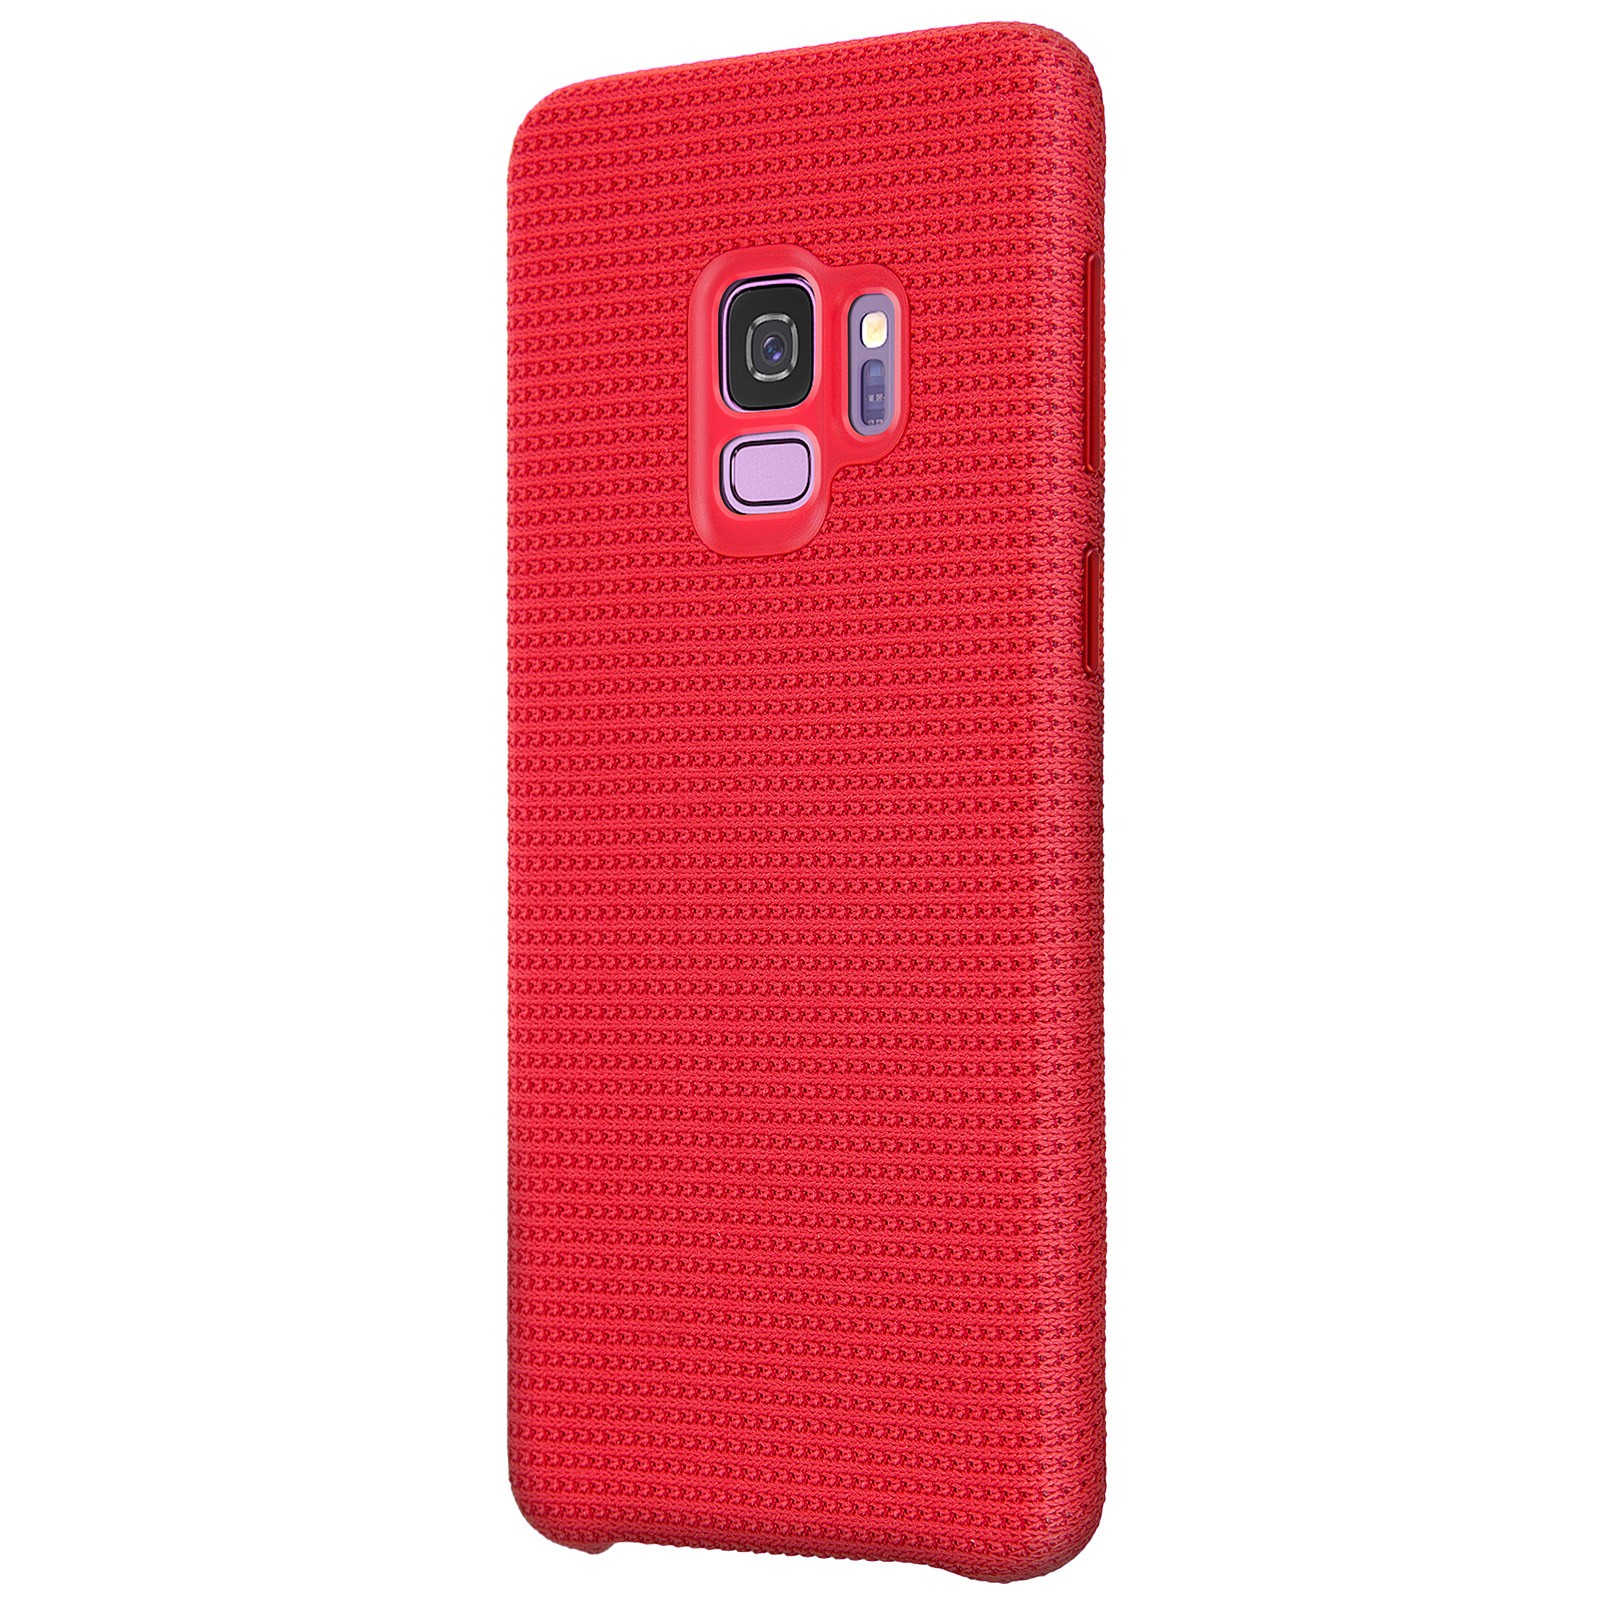 S9, Hyperknit Case Cover Bookcover, Angabe SAMSUNG Galaxy Samsung, Galaxy - (Red), for Keine S9